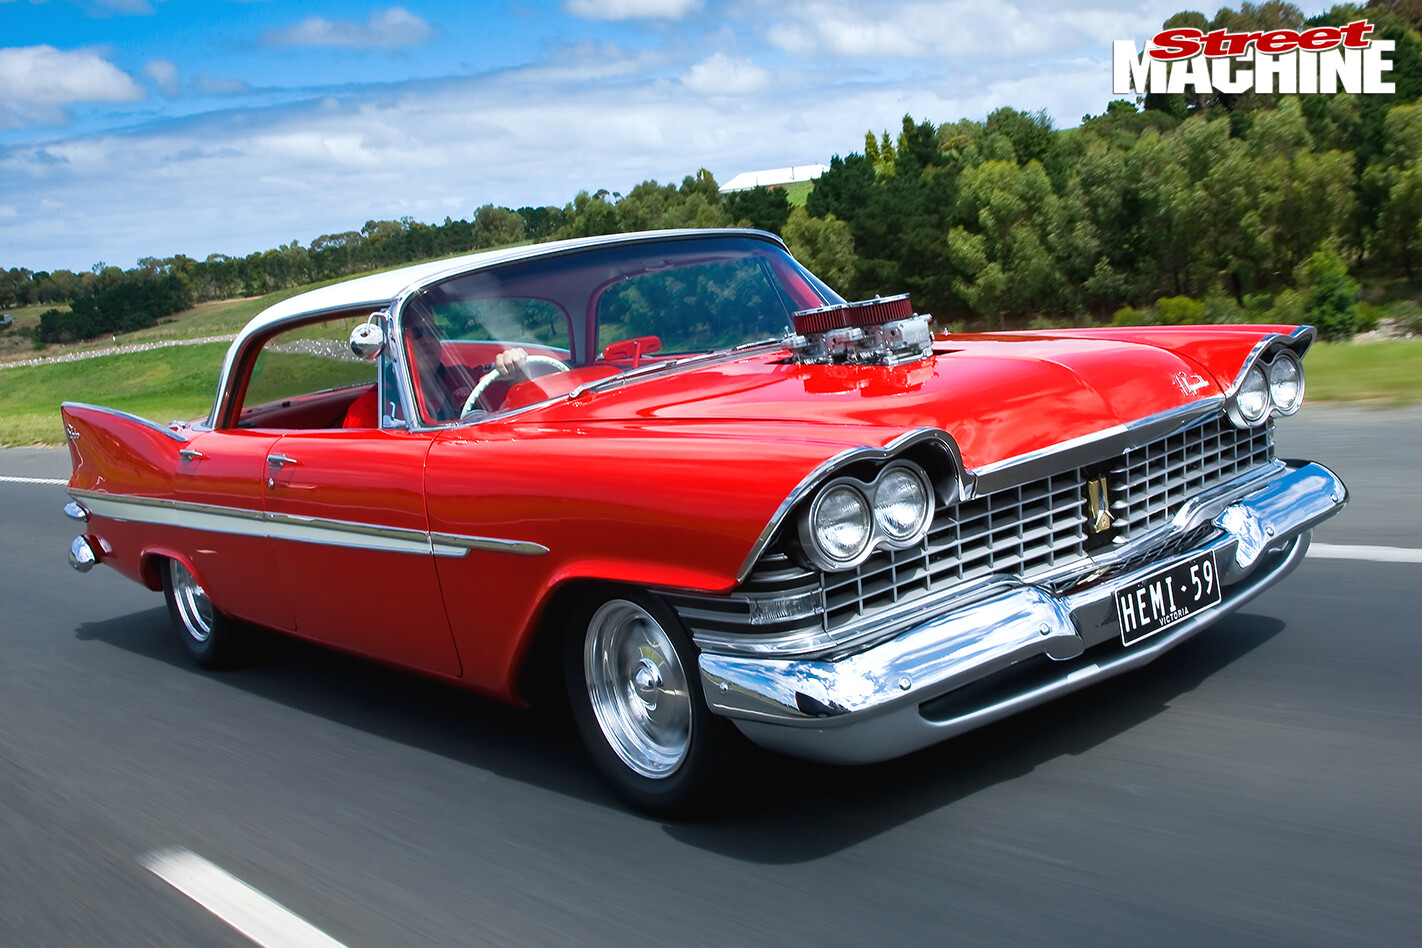 Blown -Plymouth -Belvedere -moving